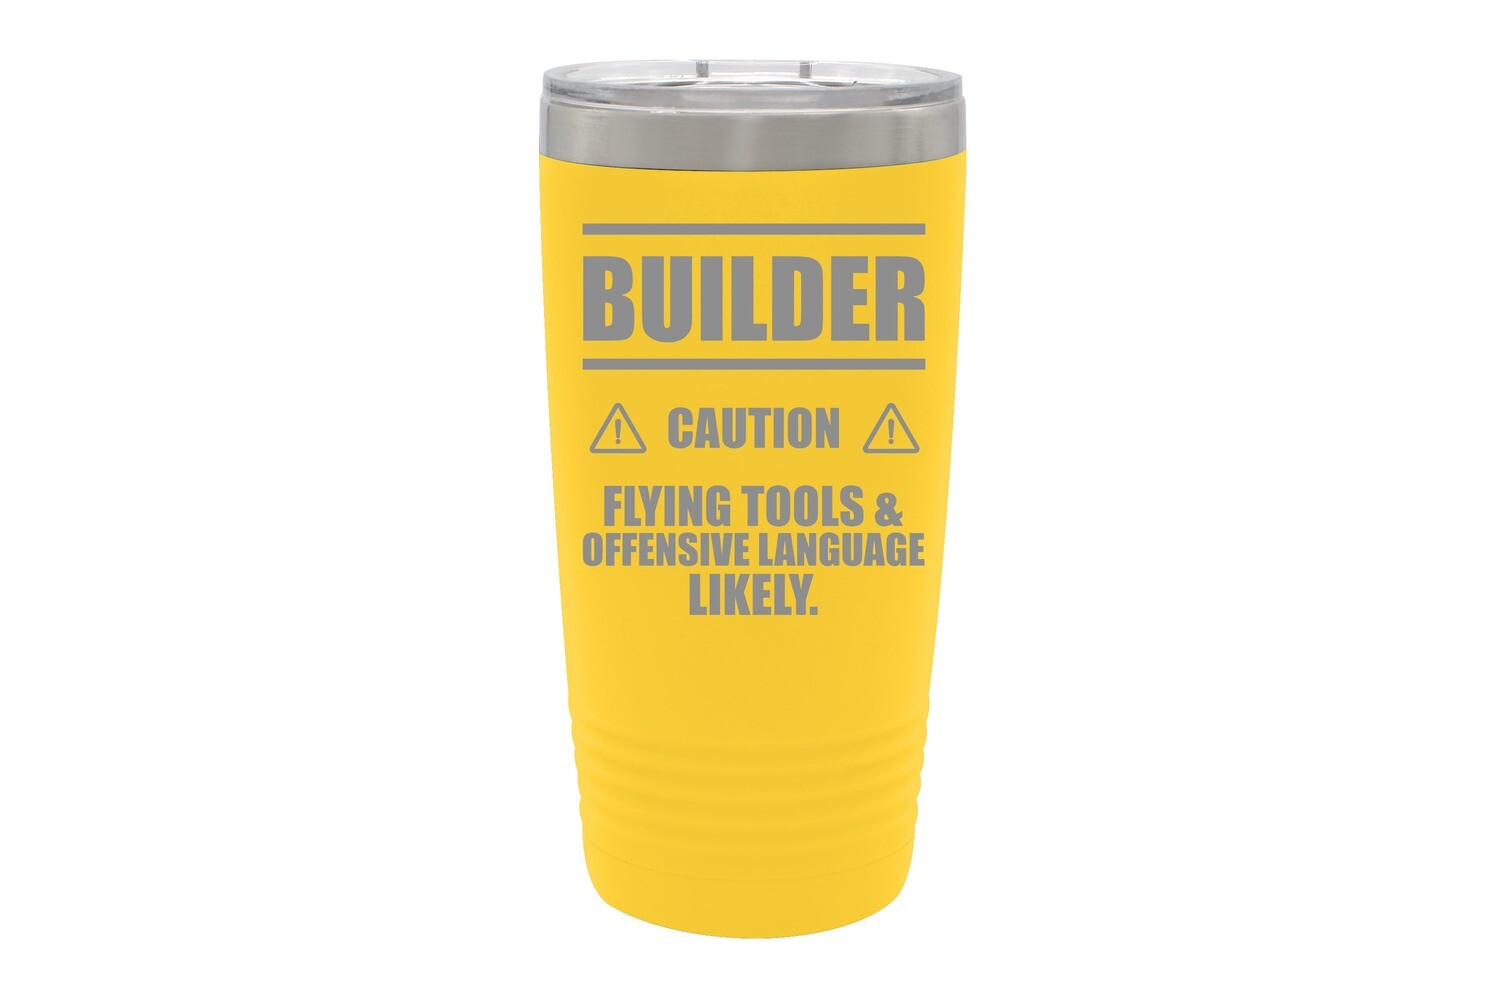 BUILDER (or Your job) caution Flying Tools & Offensive Language Likely Insulated Tumbler 20 oz